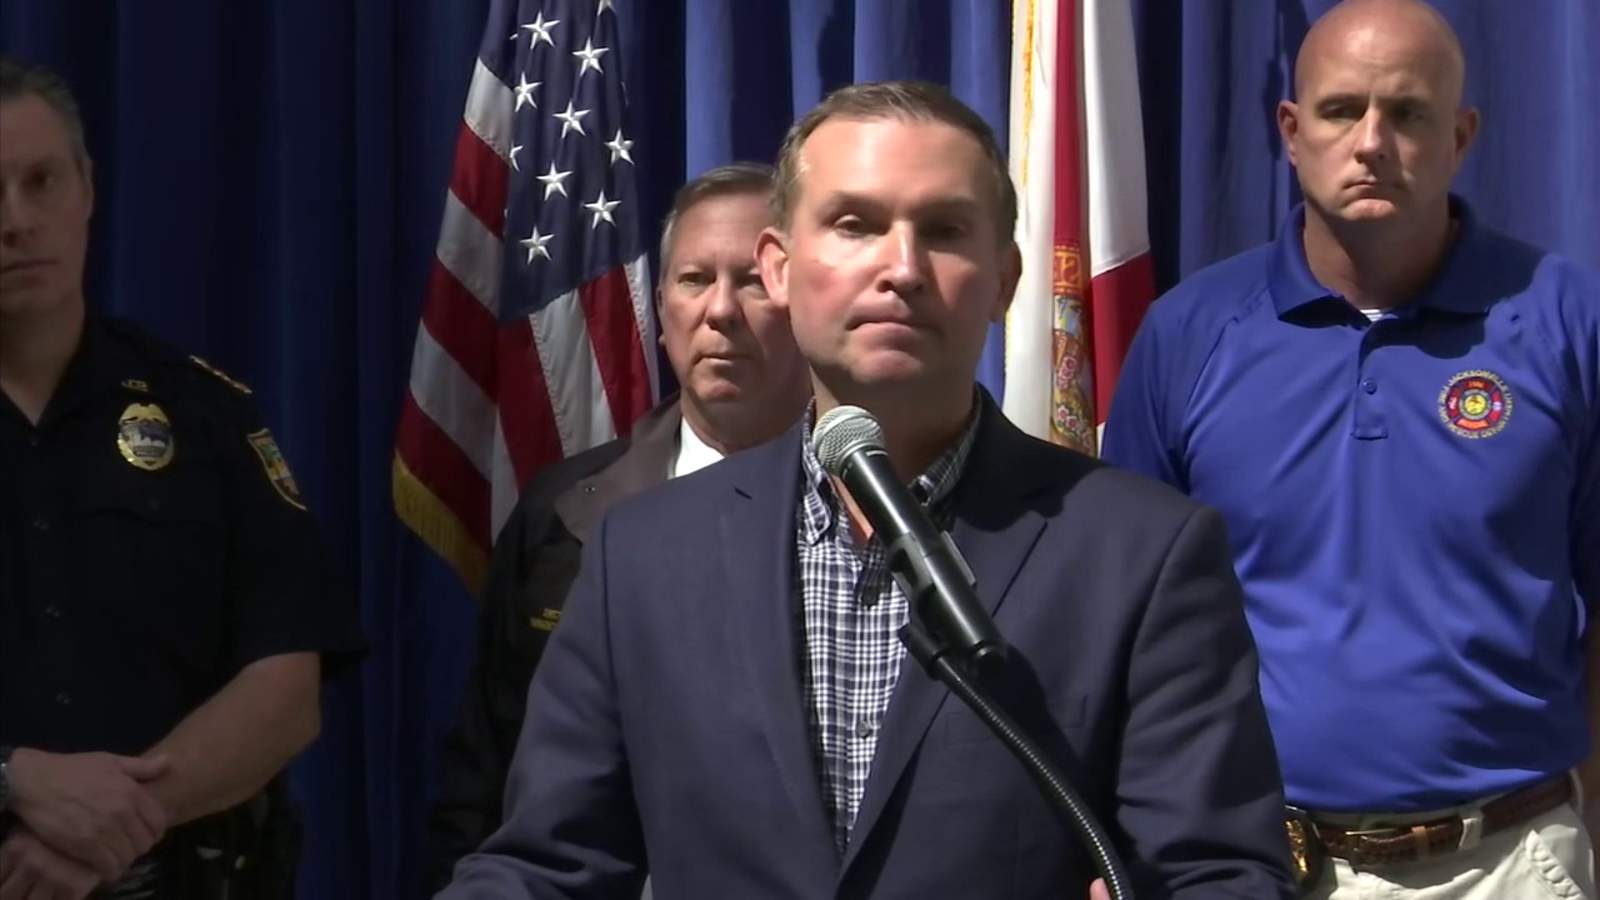 Mayor Curry to walk with community, announce new policy initiatives next week